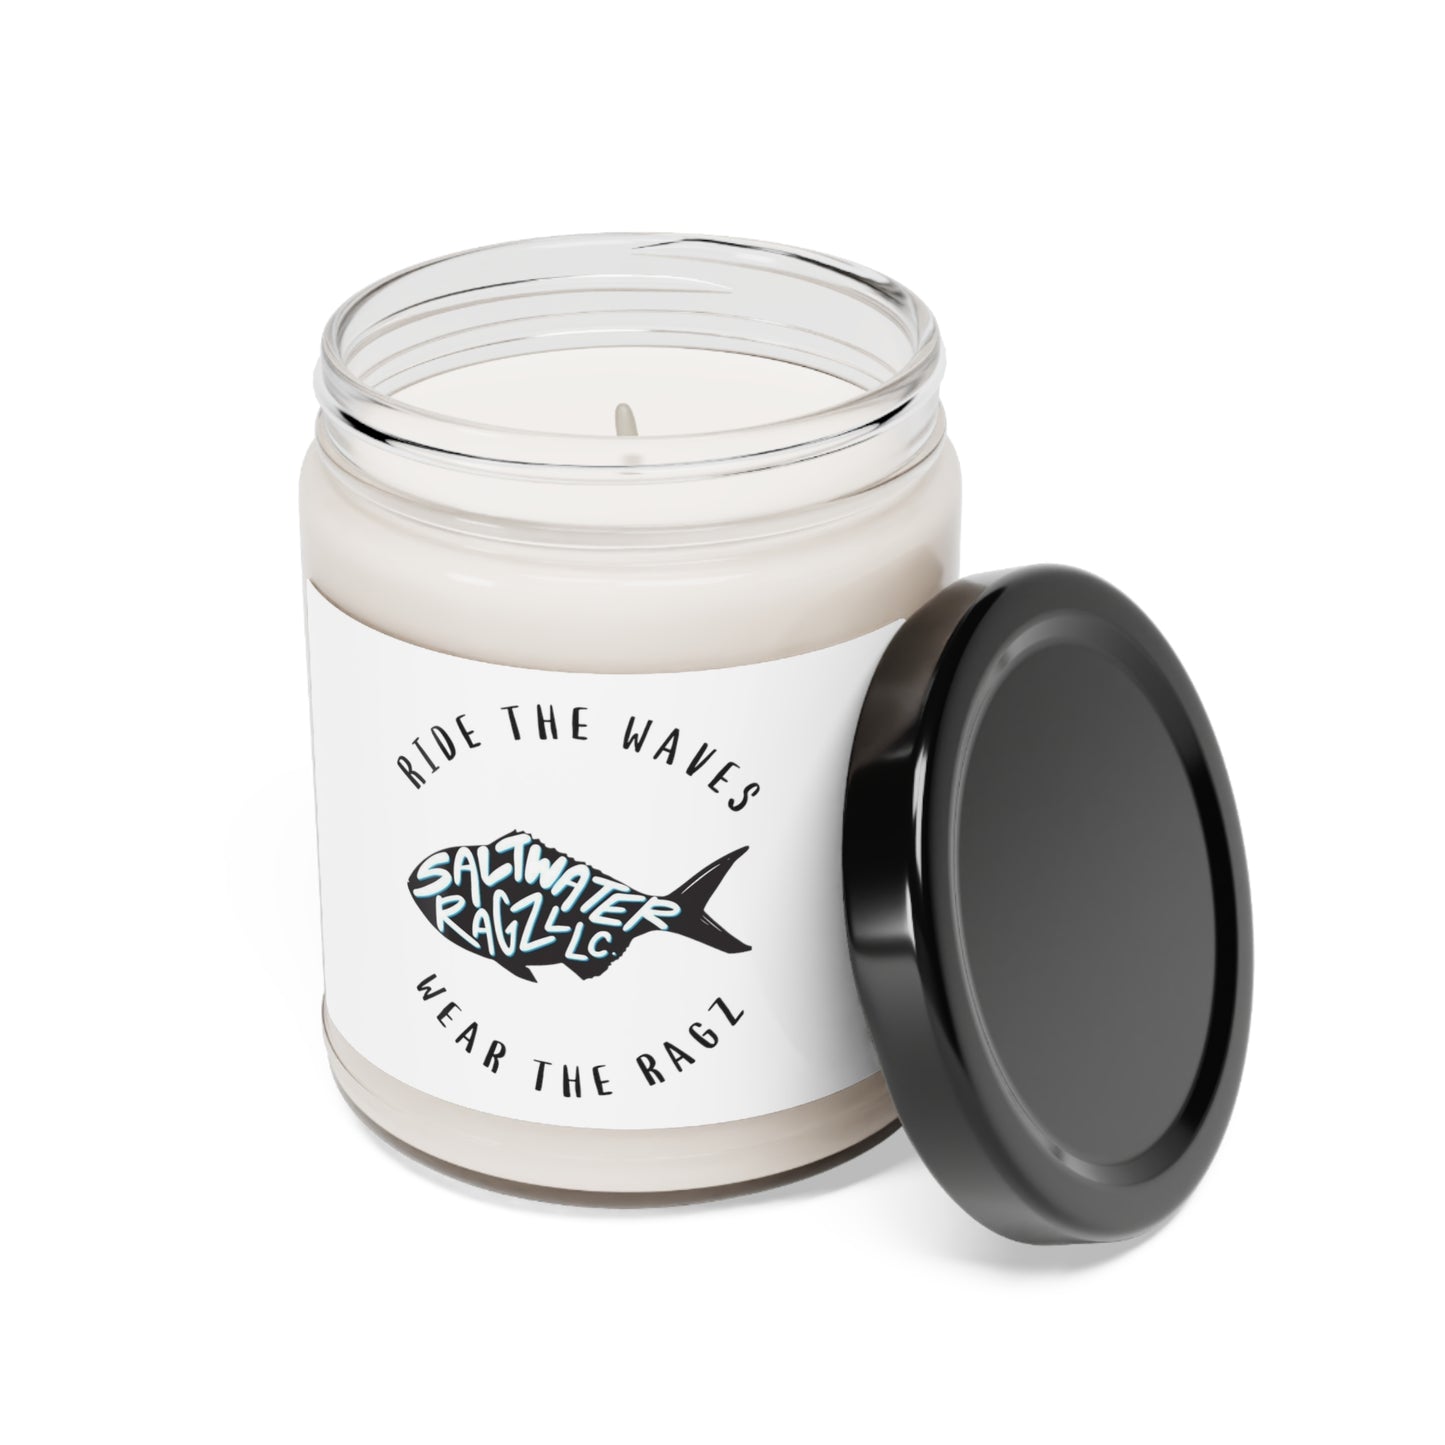 Saltwater Ragz - Scented Soy Candle, 9oz